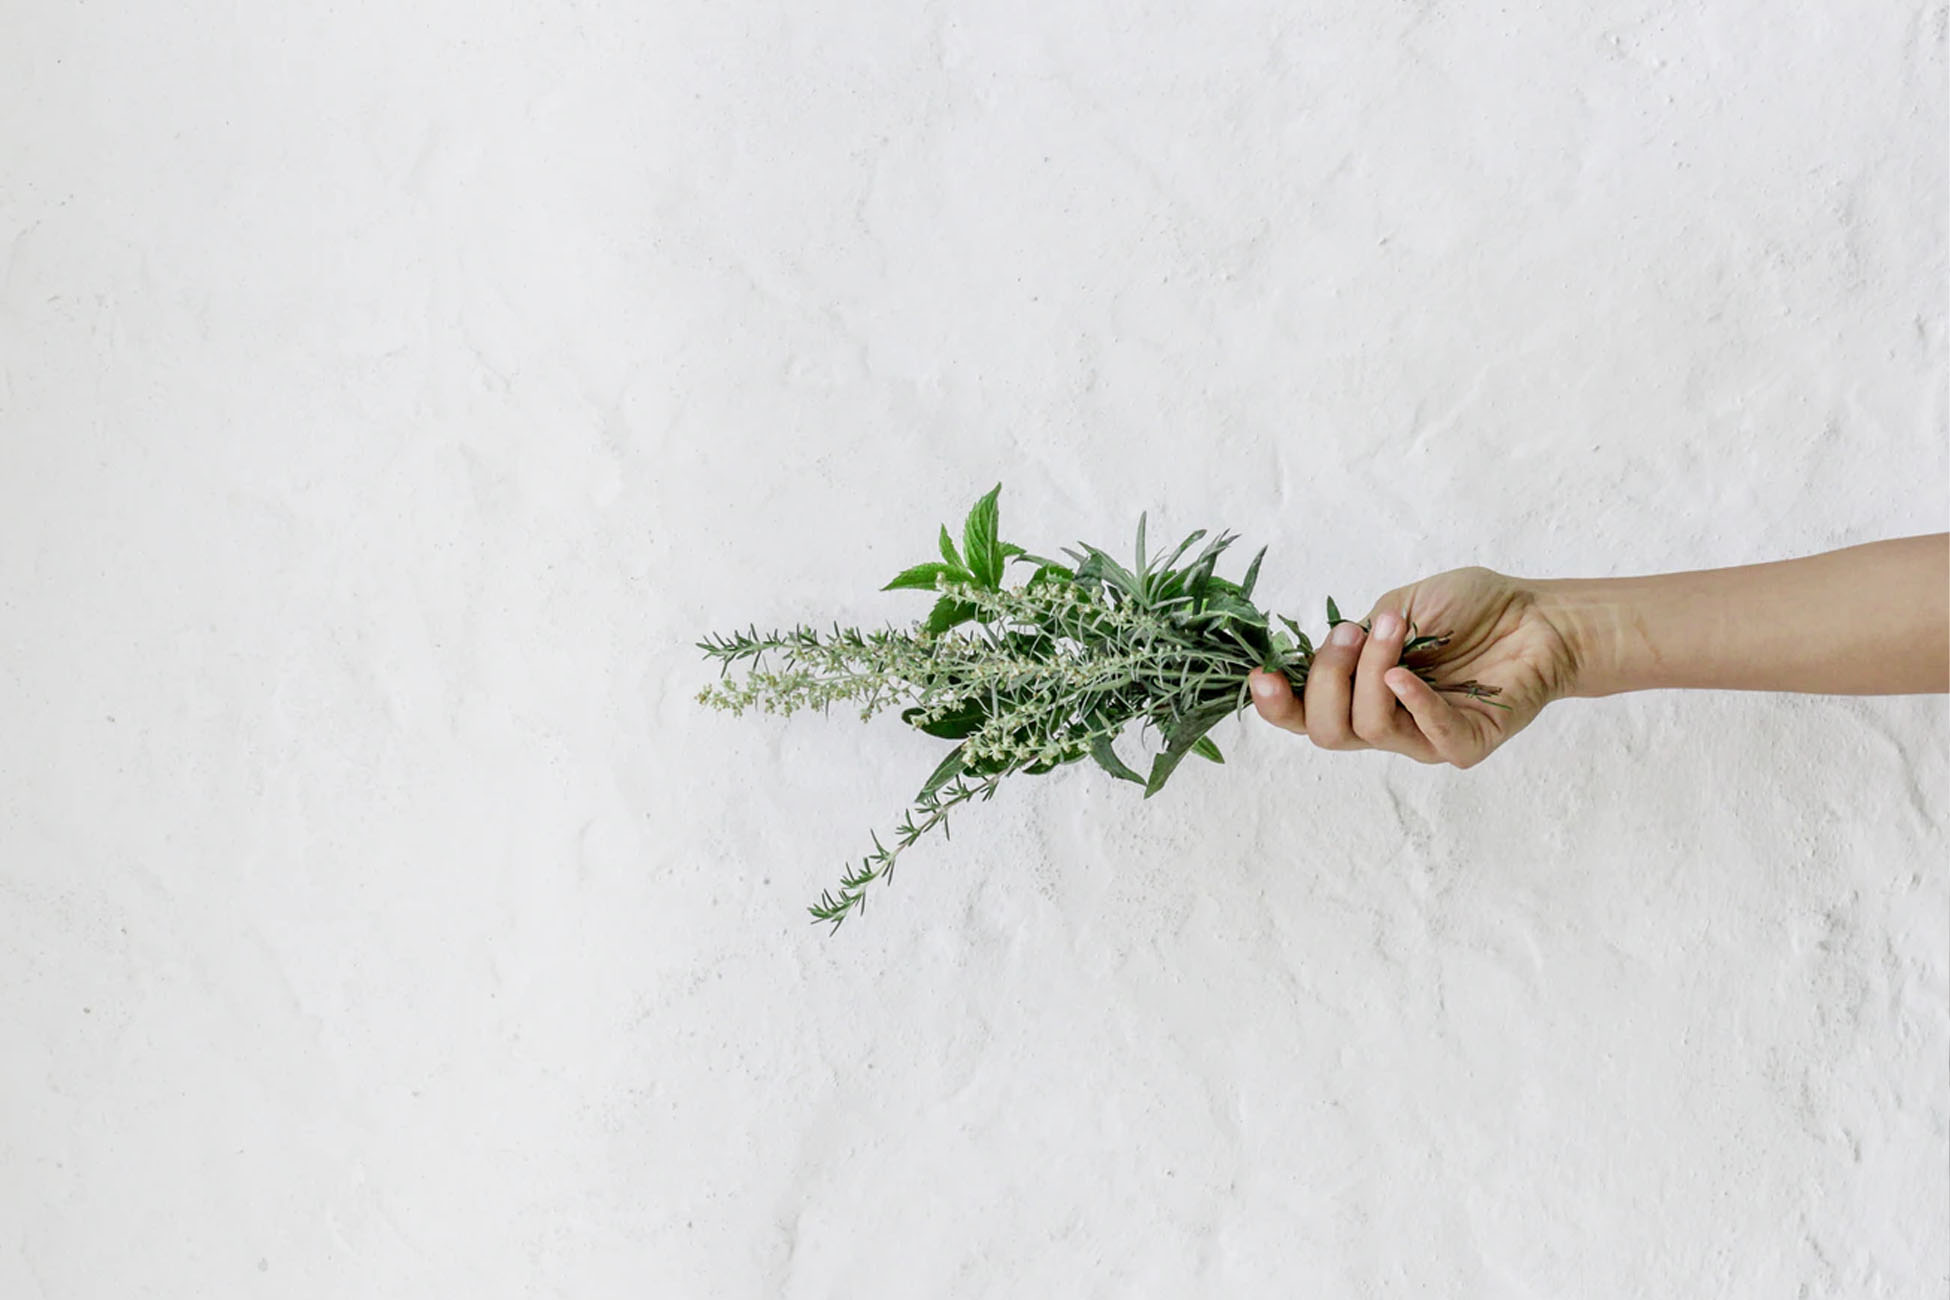 A person holding herbs